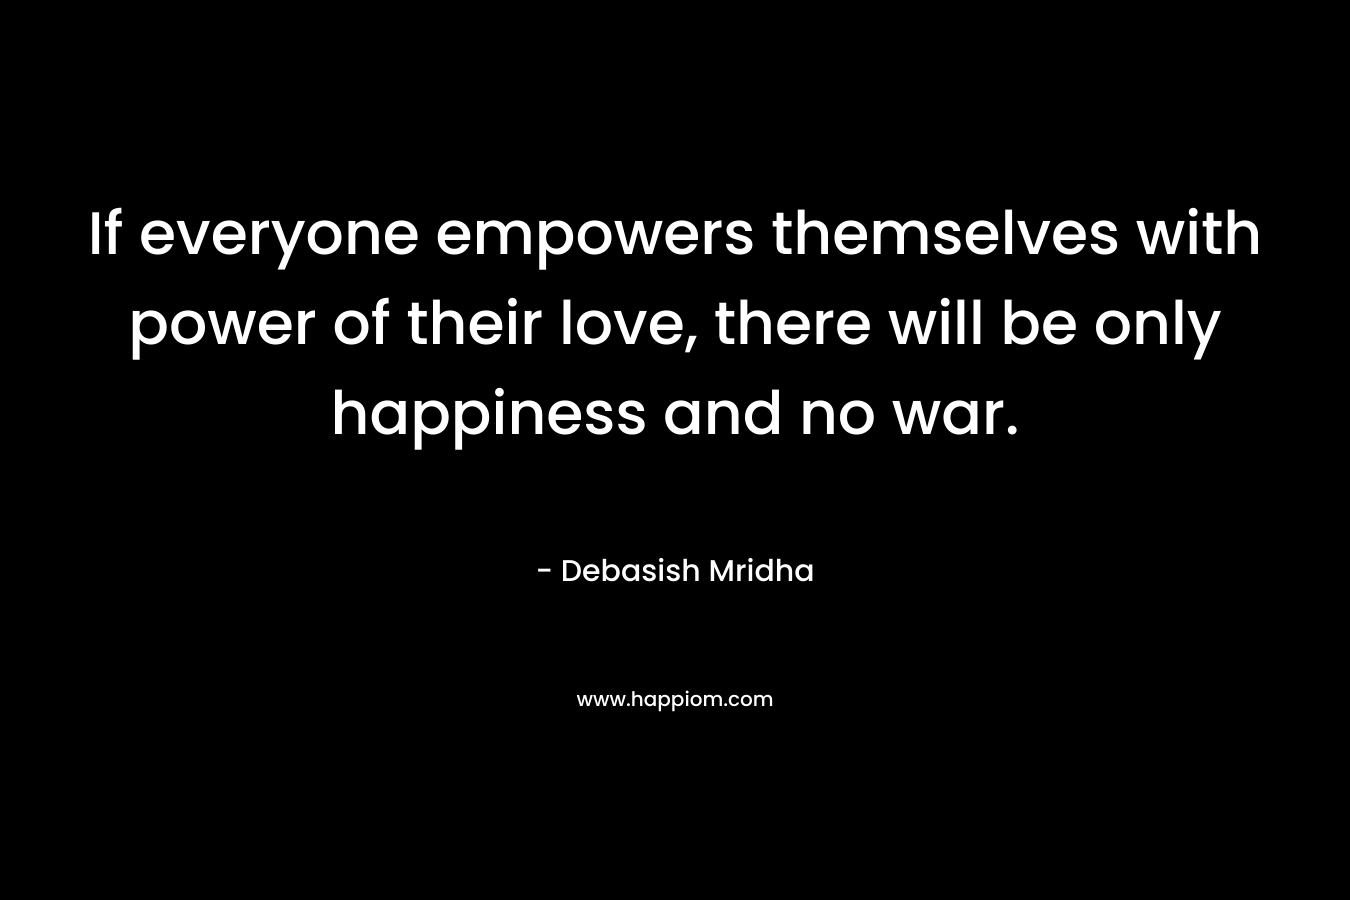 If everyone empowers themselves with power of their love, there will be only happiness and no war.